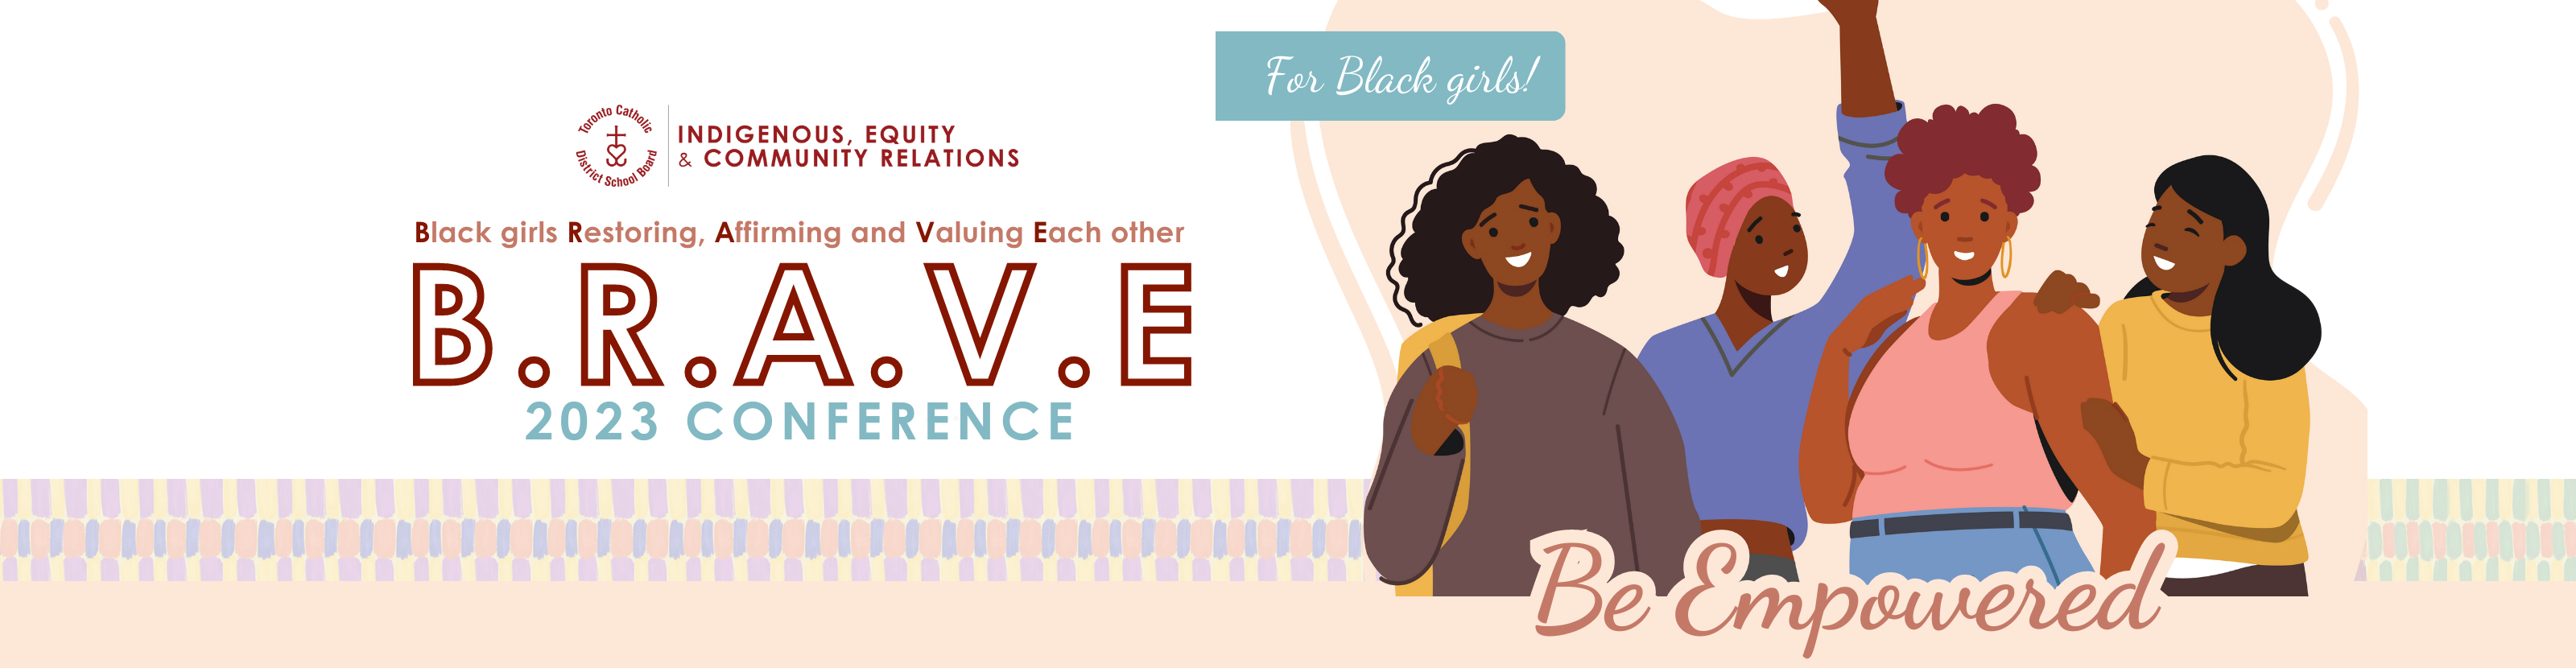 Brave Conference 2023 BANNER - The Indigenous, Equity & Community Relations logo is at the top of the flyer. The main text says Black girls Restoring Affirming and Valuing Each Other - BRAVE 2023 Conference - For Black girls! There is a clip artwork of four Black girls smiling together, with the text "Be Empowered" over them.